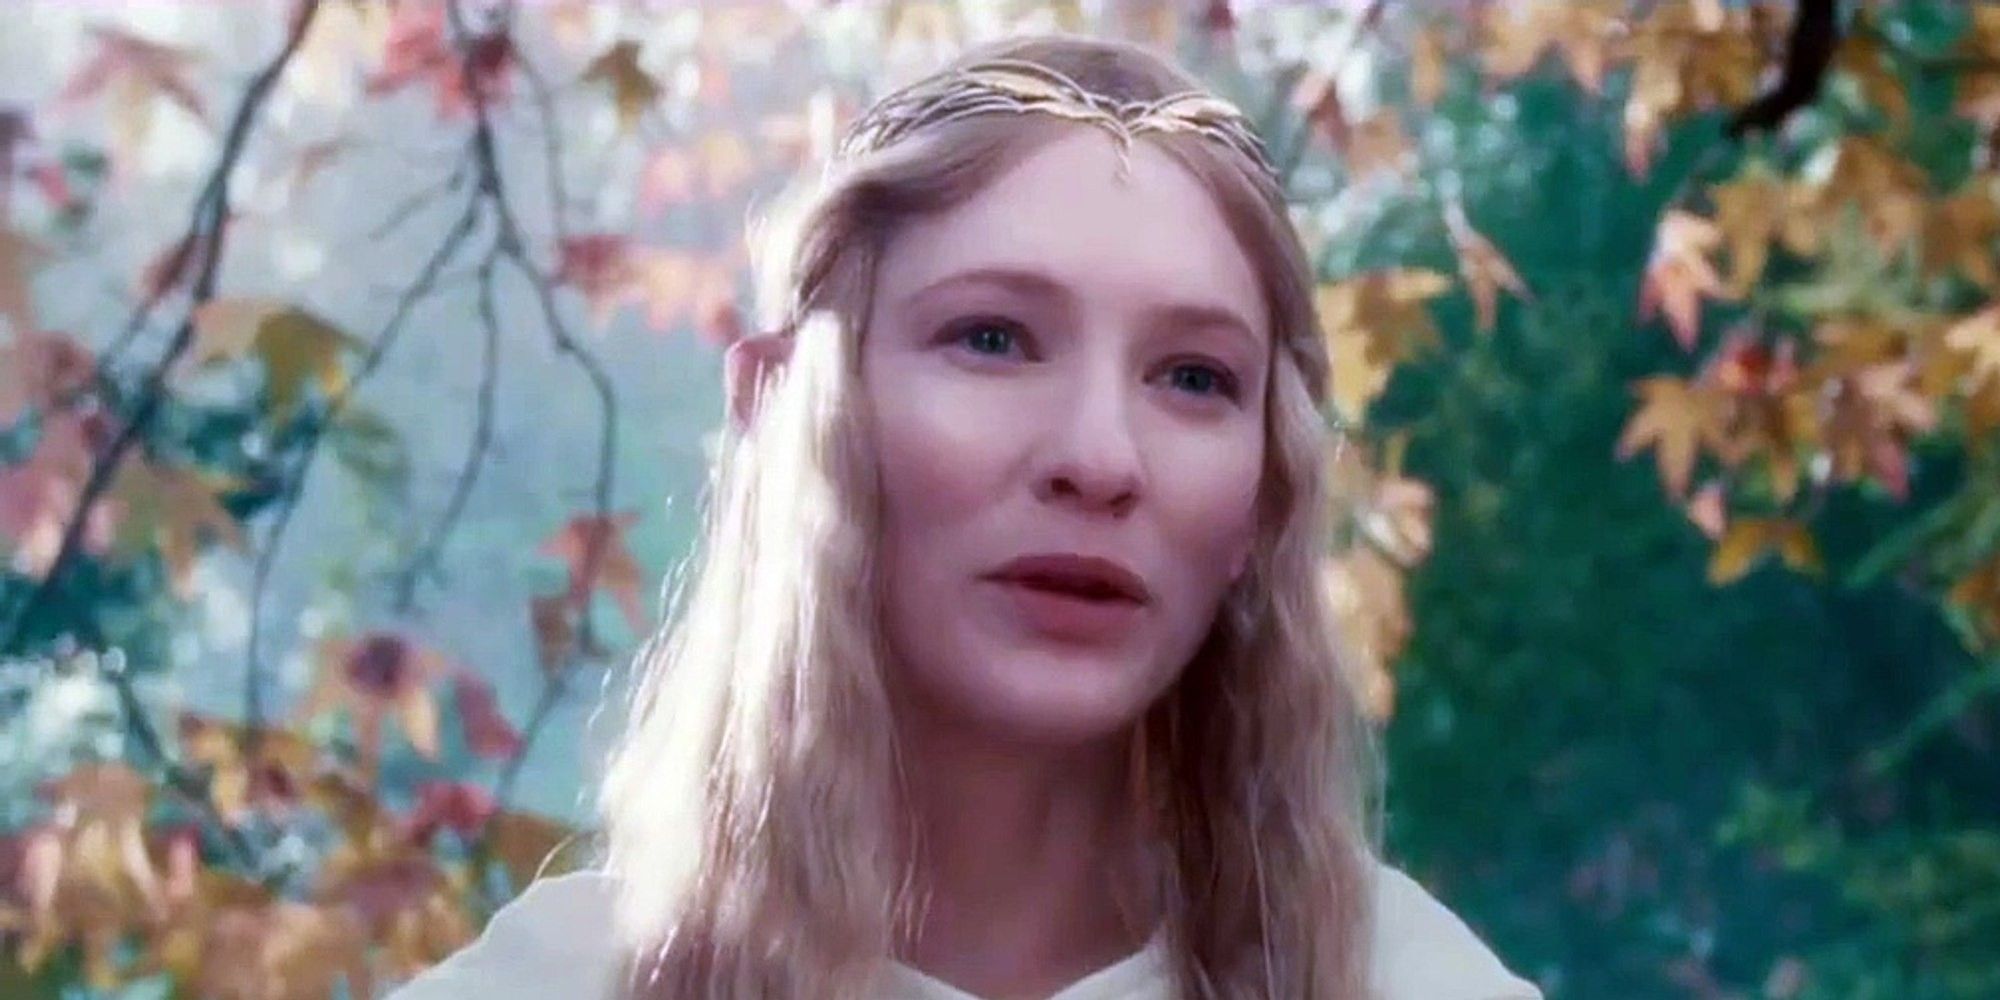 Cate Blanchett as Galadriel in Lord of the Rings Fellowship of the Ring.